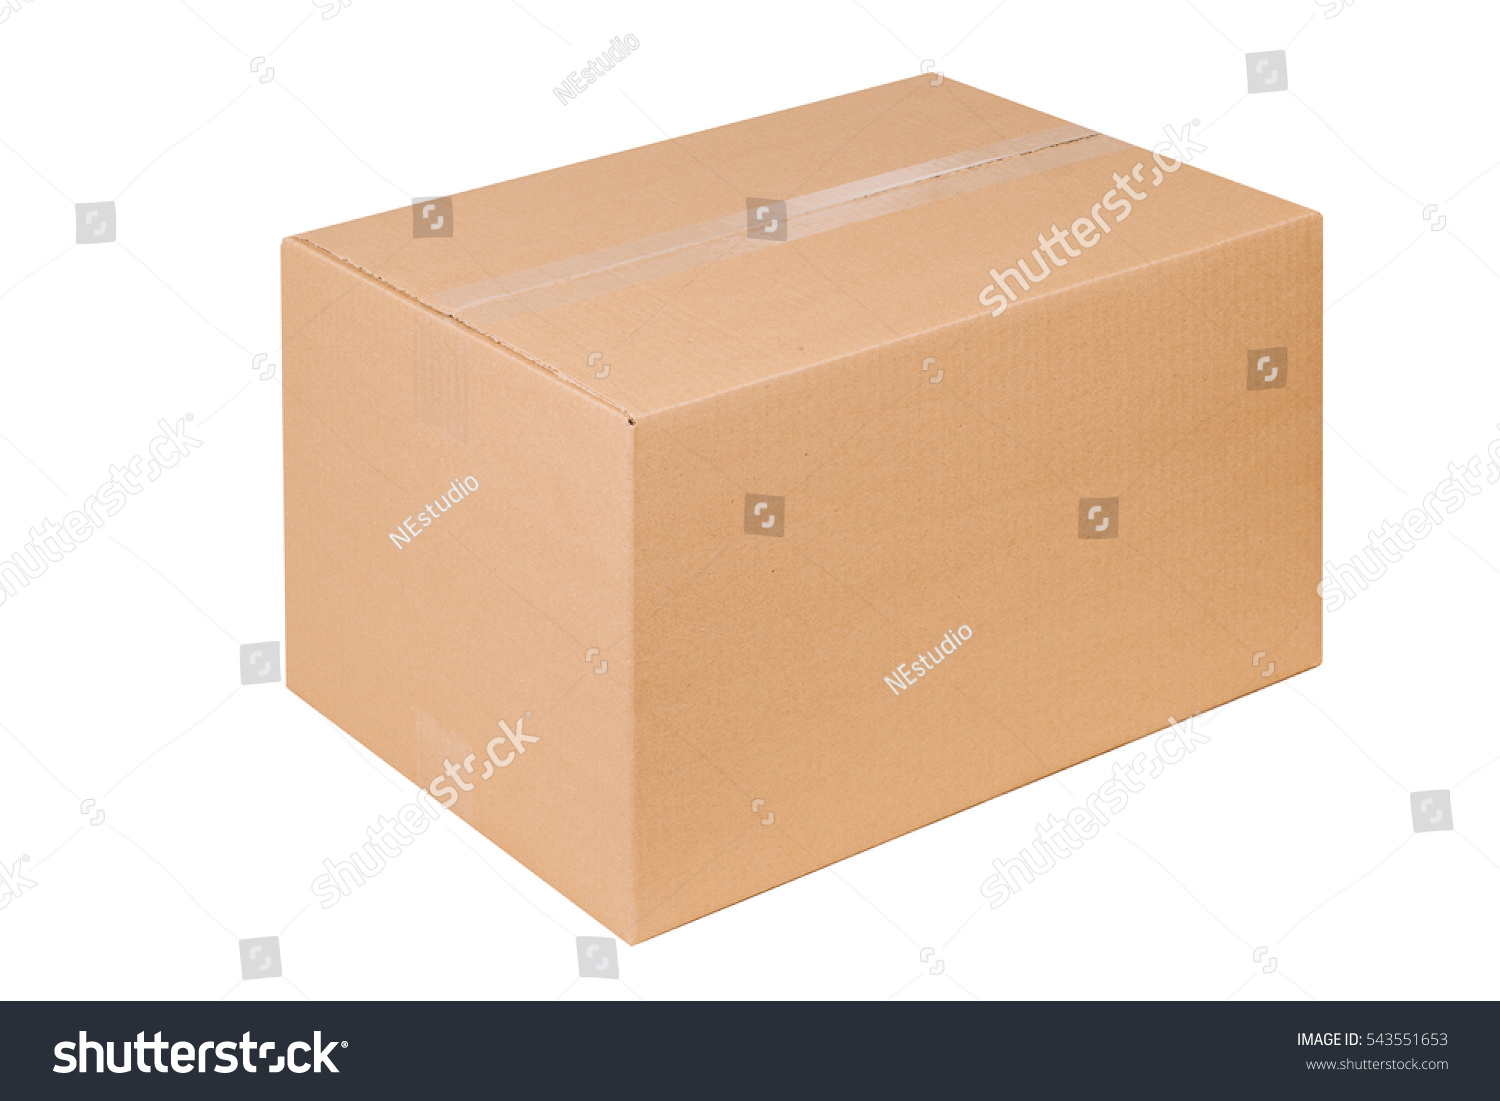 Closed cardboard box taped up and isolated on white background #543551653